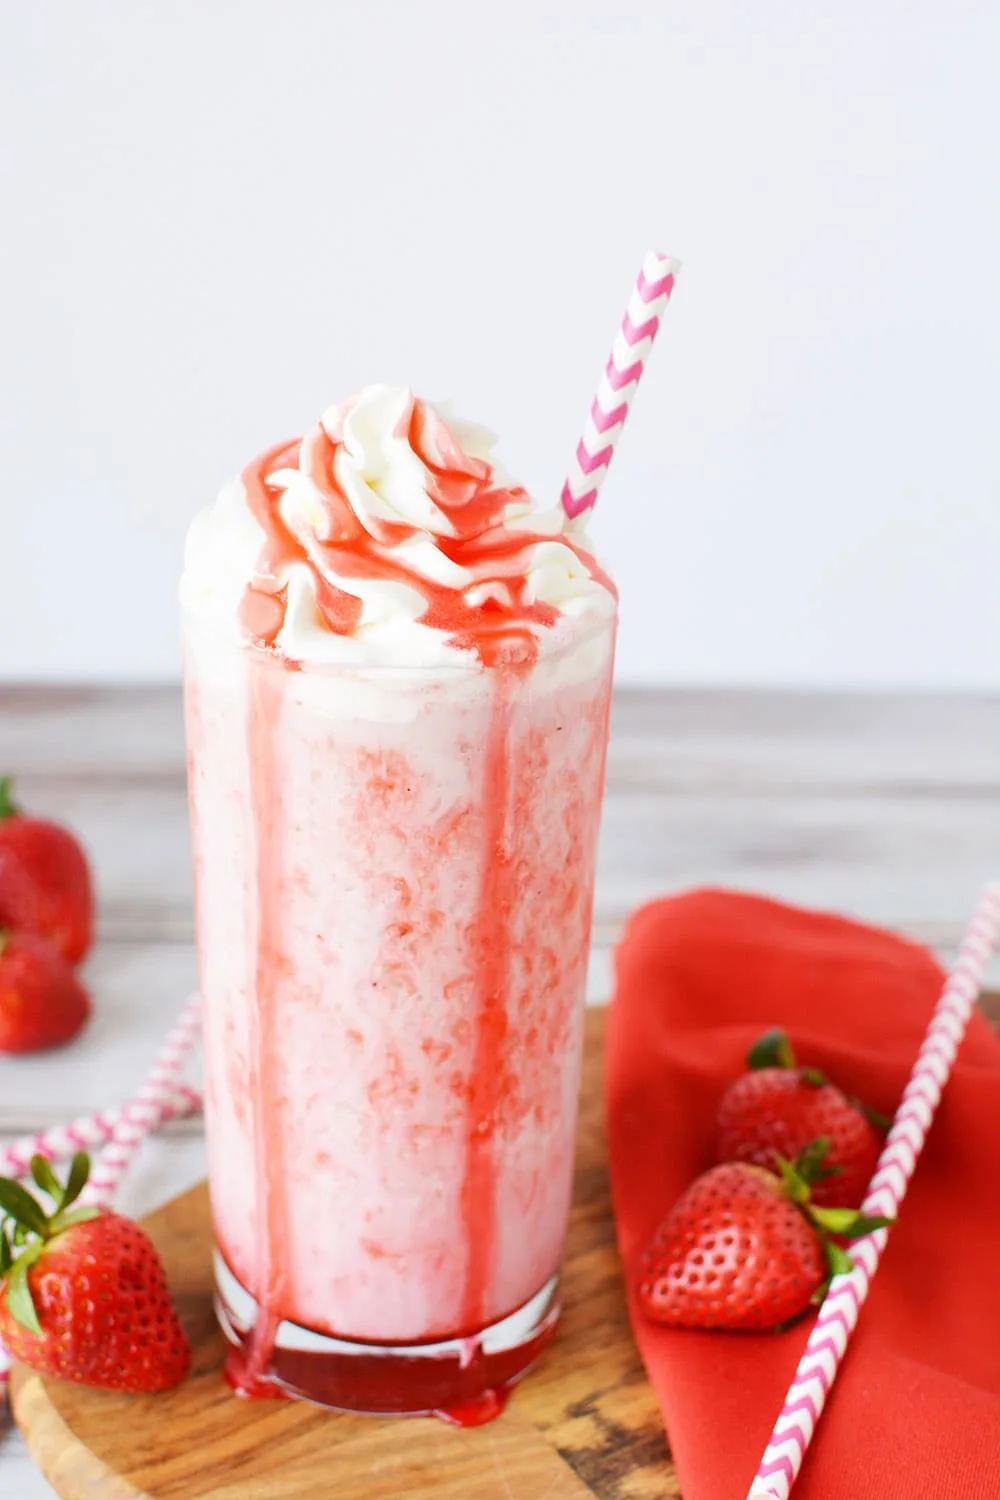 Glass of strawberry frappuccino next to strawberries.